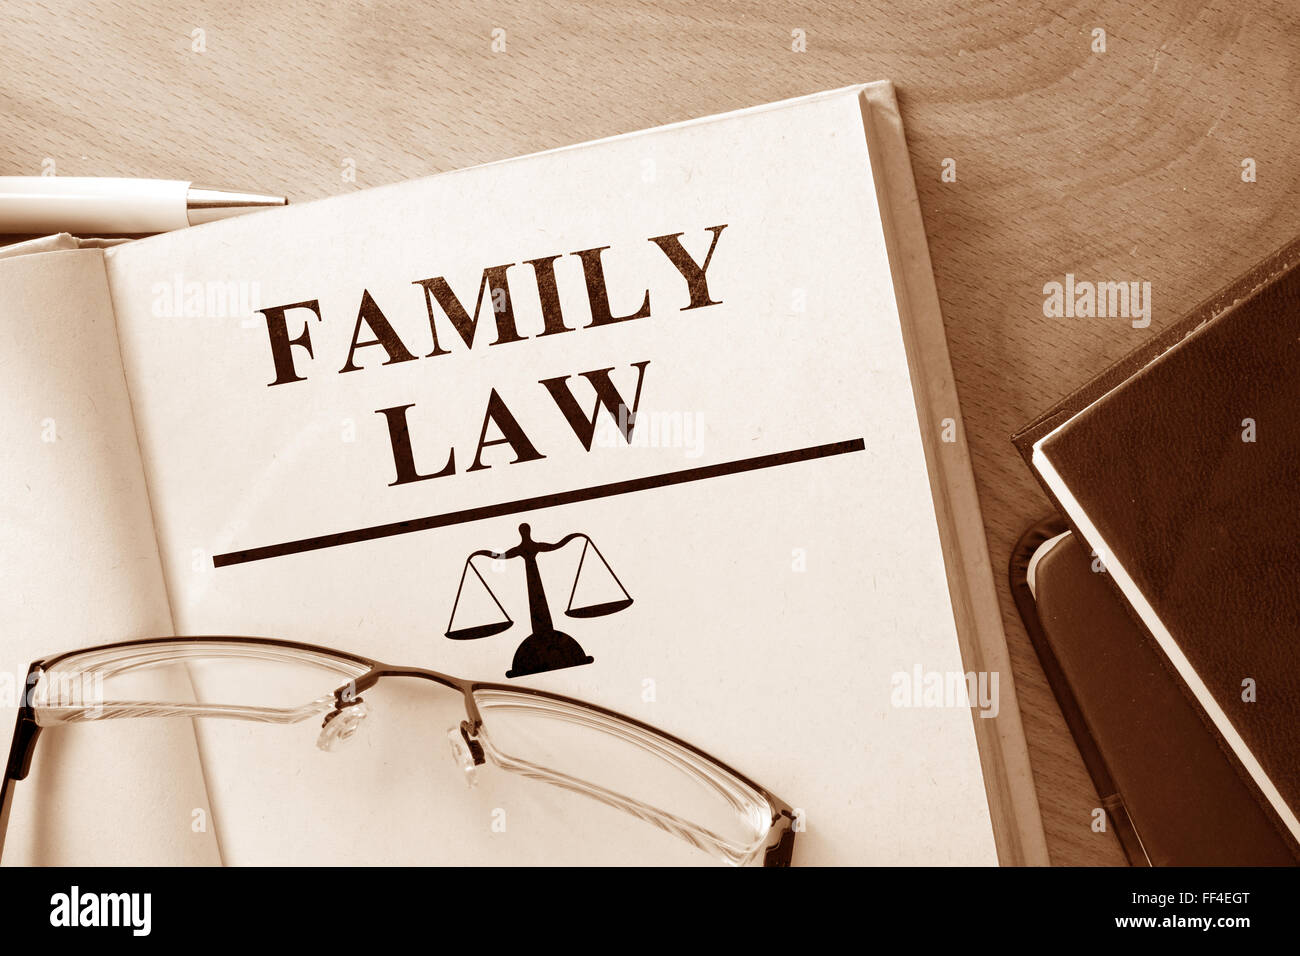 Code of family law on a wooden table. Stock Photo